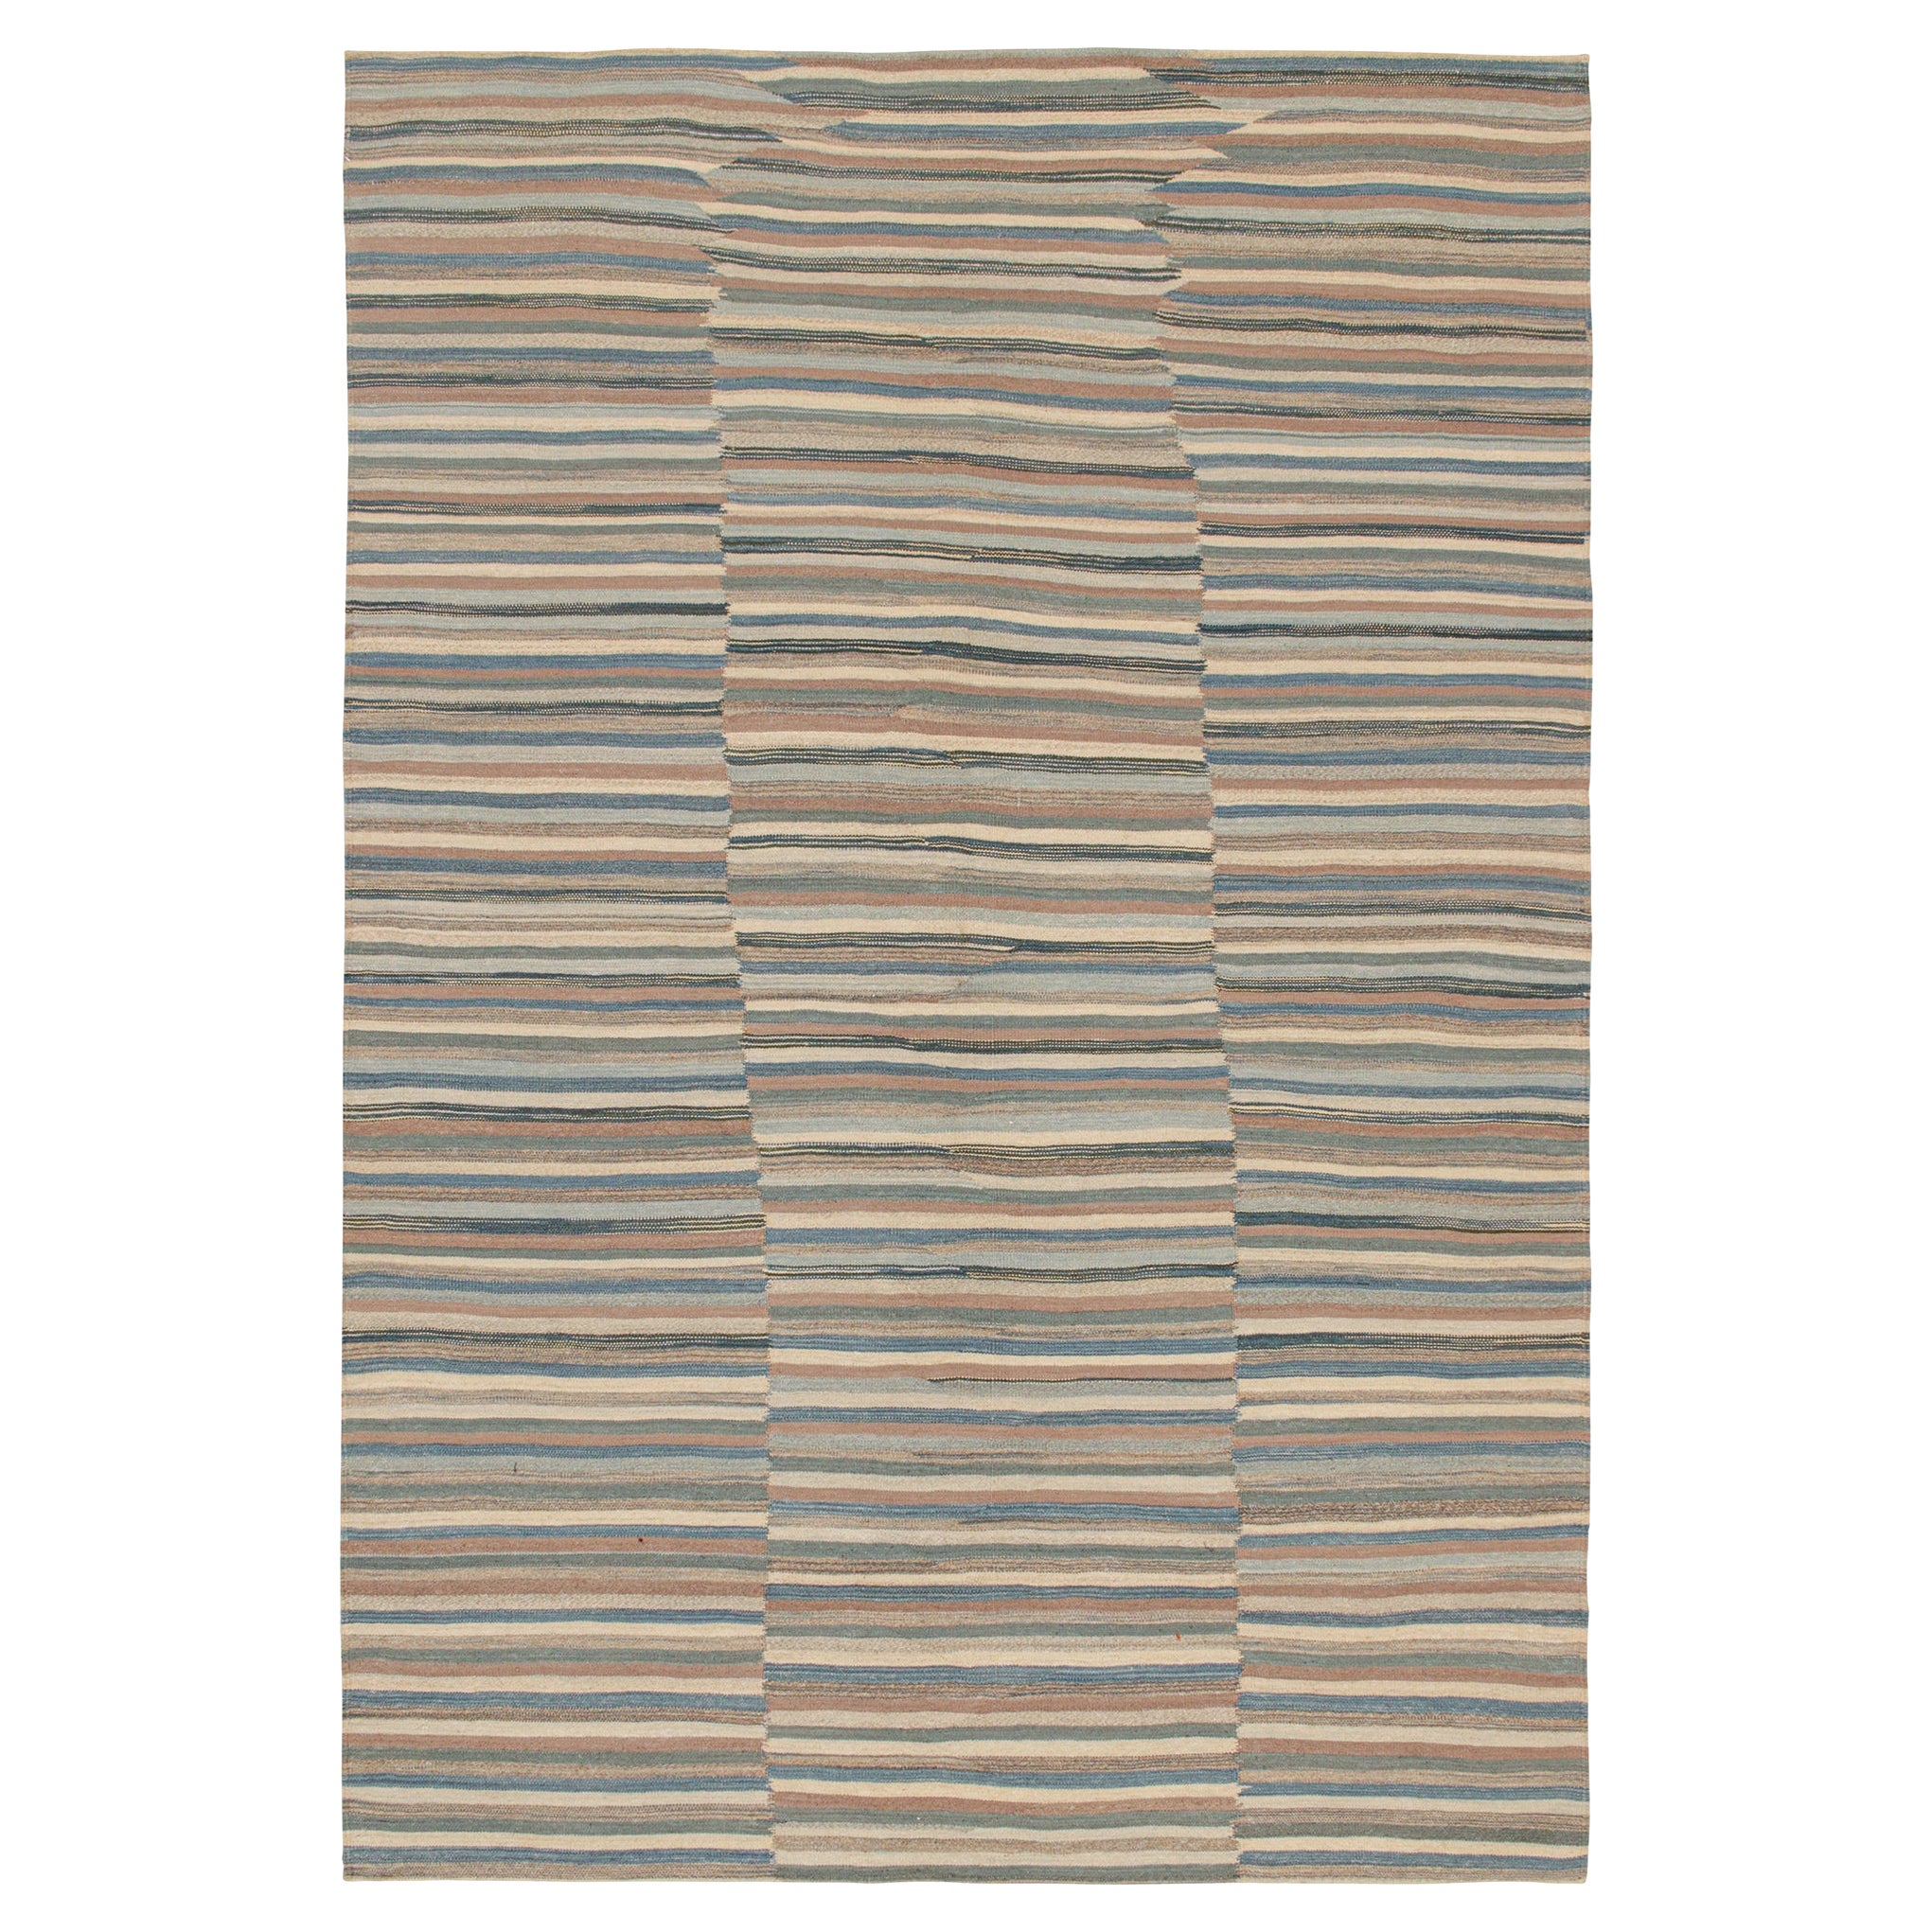 Vintage Persian Kilim with Panels in Beige-Brown and Blue Stripes by Rug & Kilim